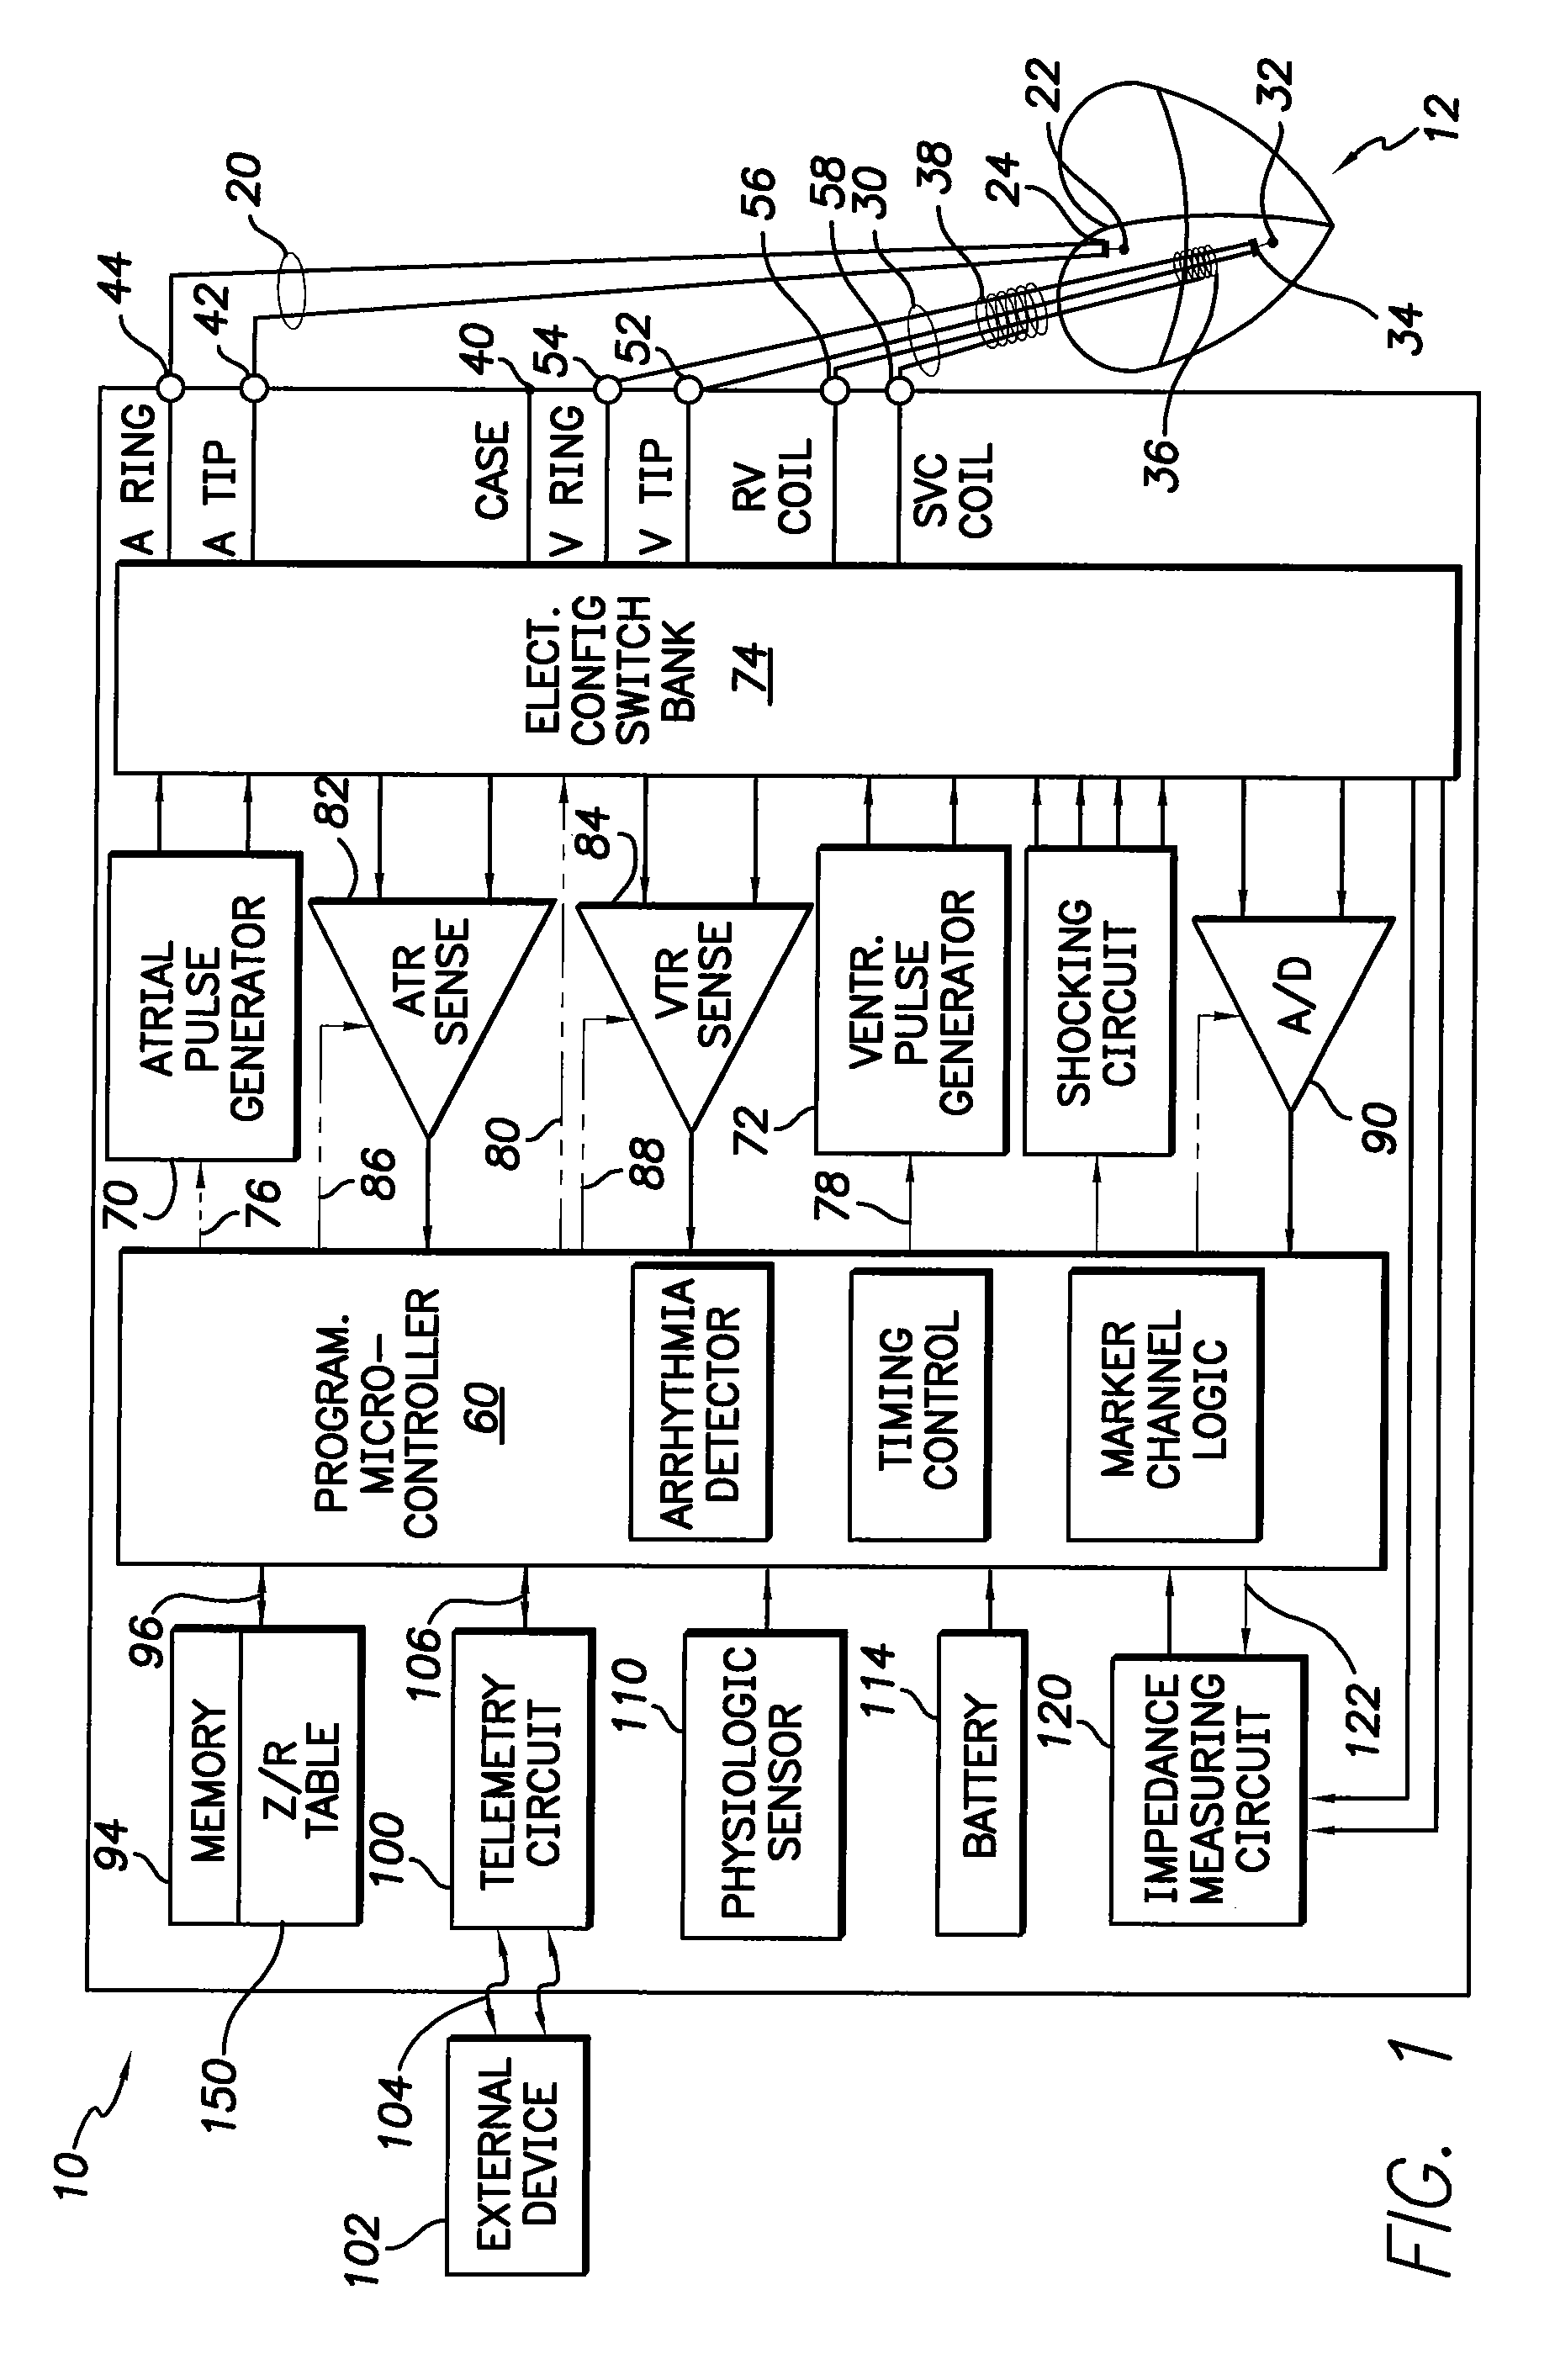 Apparatus and method for two-component bioelectrical impedance ratio measuring and monitoring